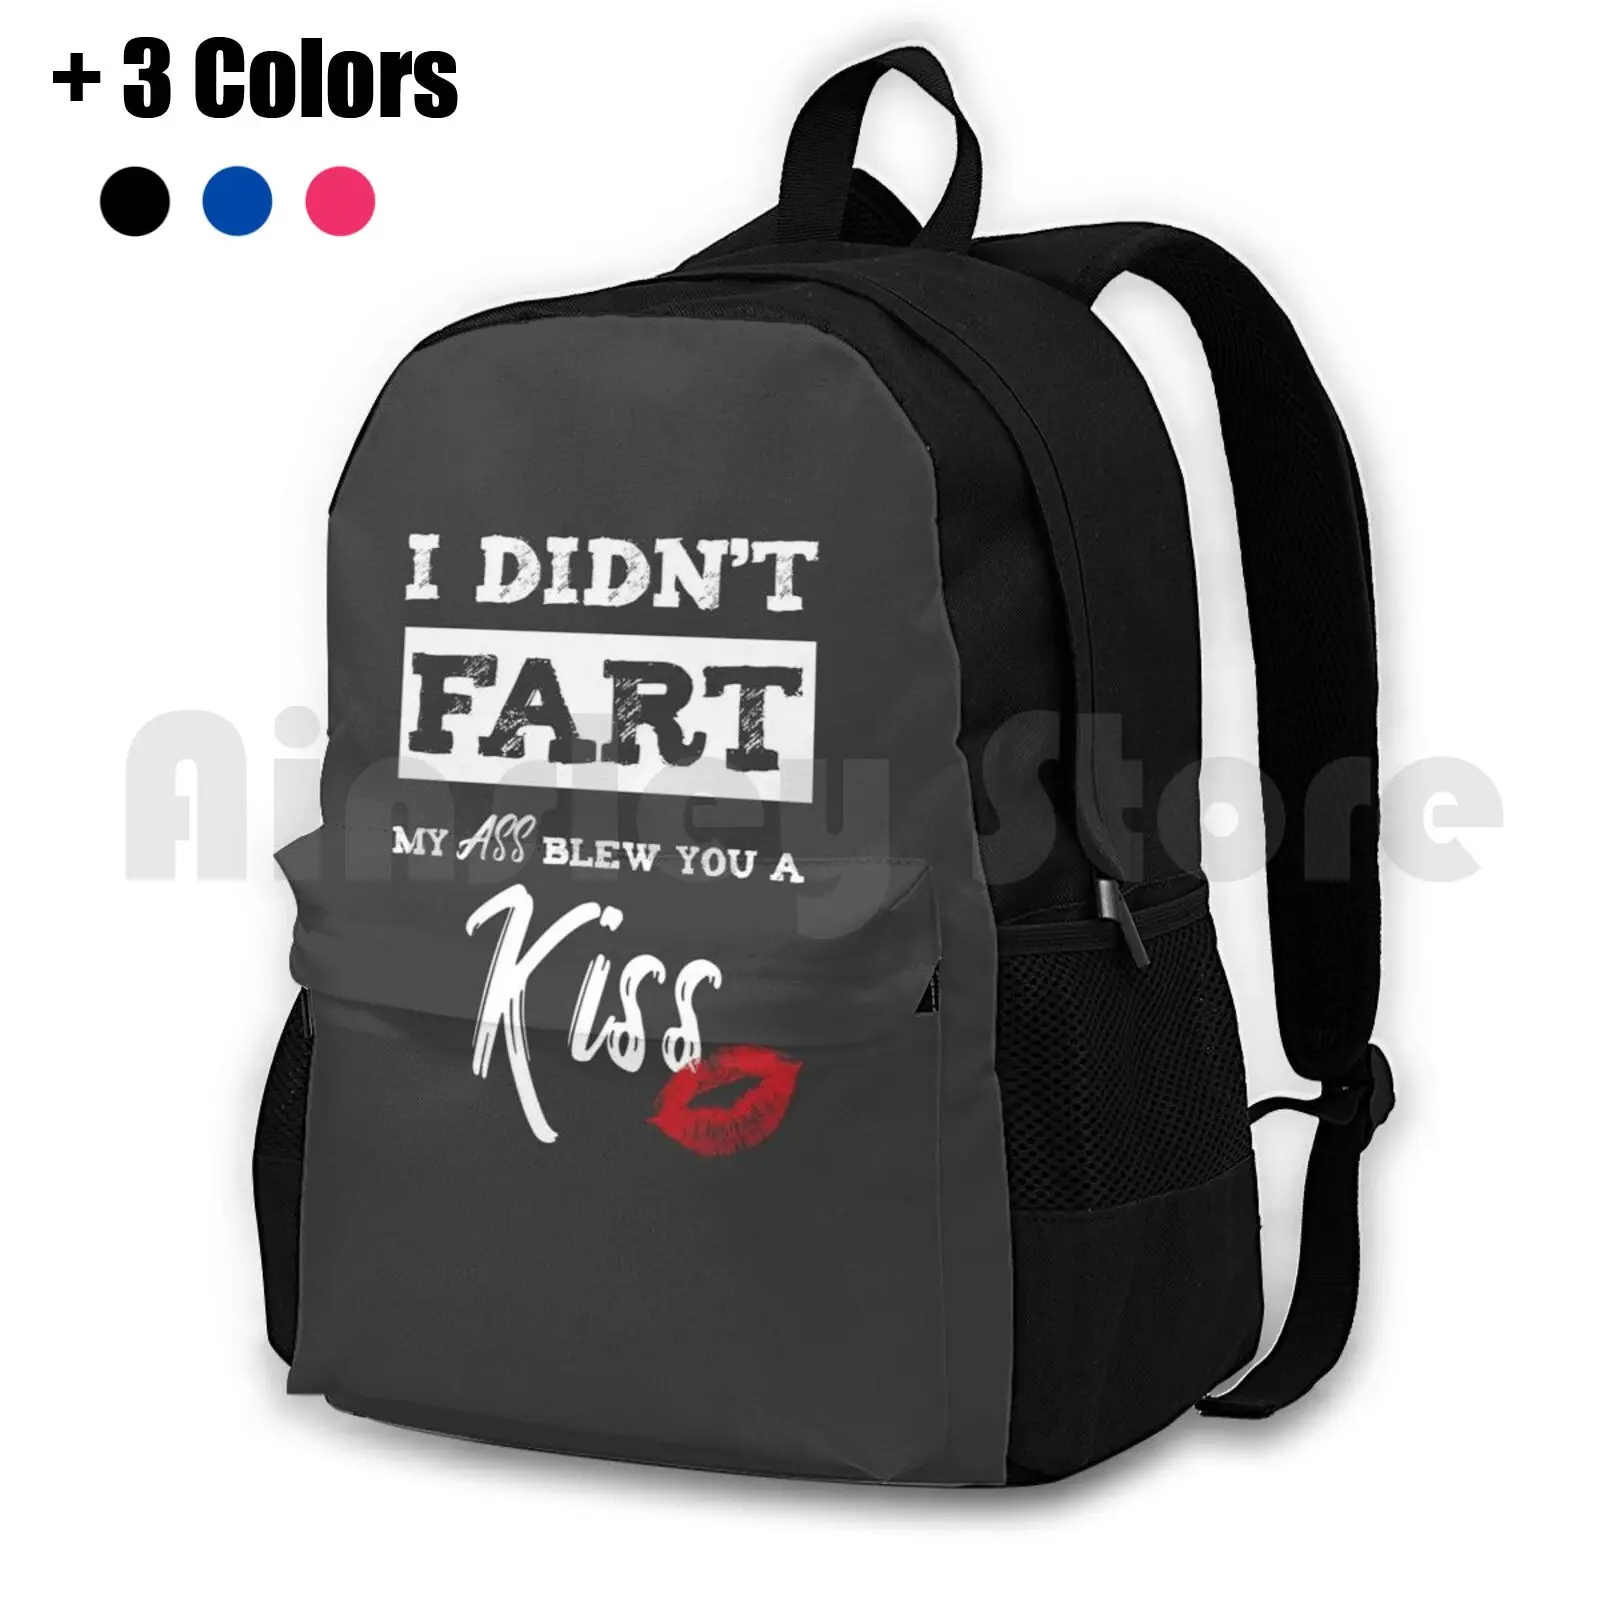 I Didn'T Fart My Ass Blew You A Kiss Funny Silly Farters Gift Outdoor Hiking Backpack Riding Climbing Sports Bag Potty Humor